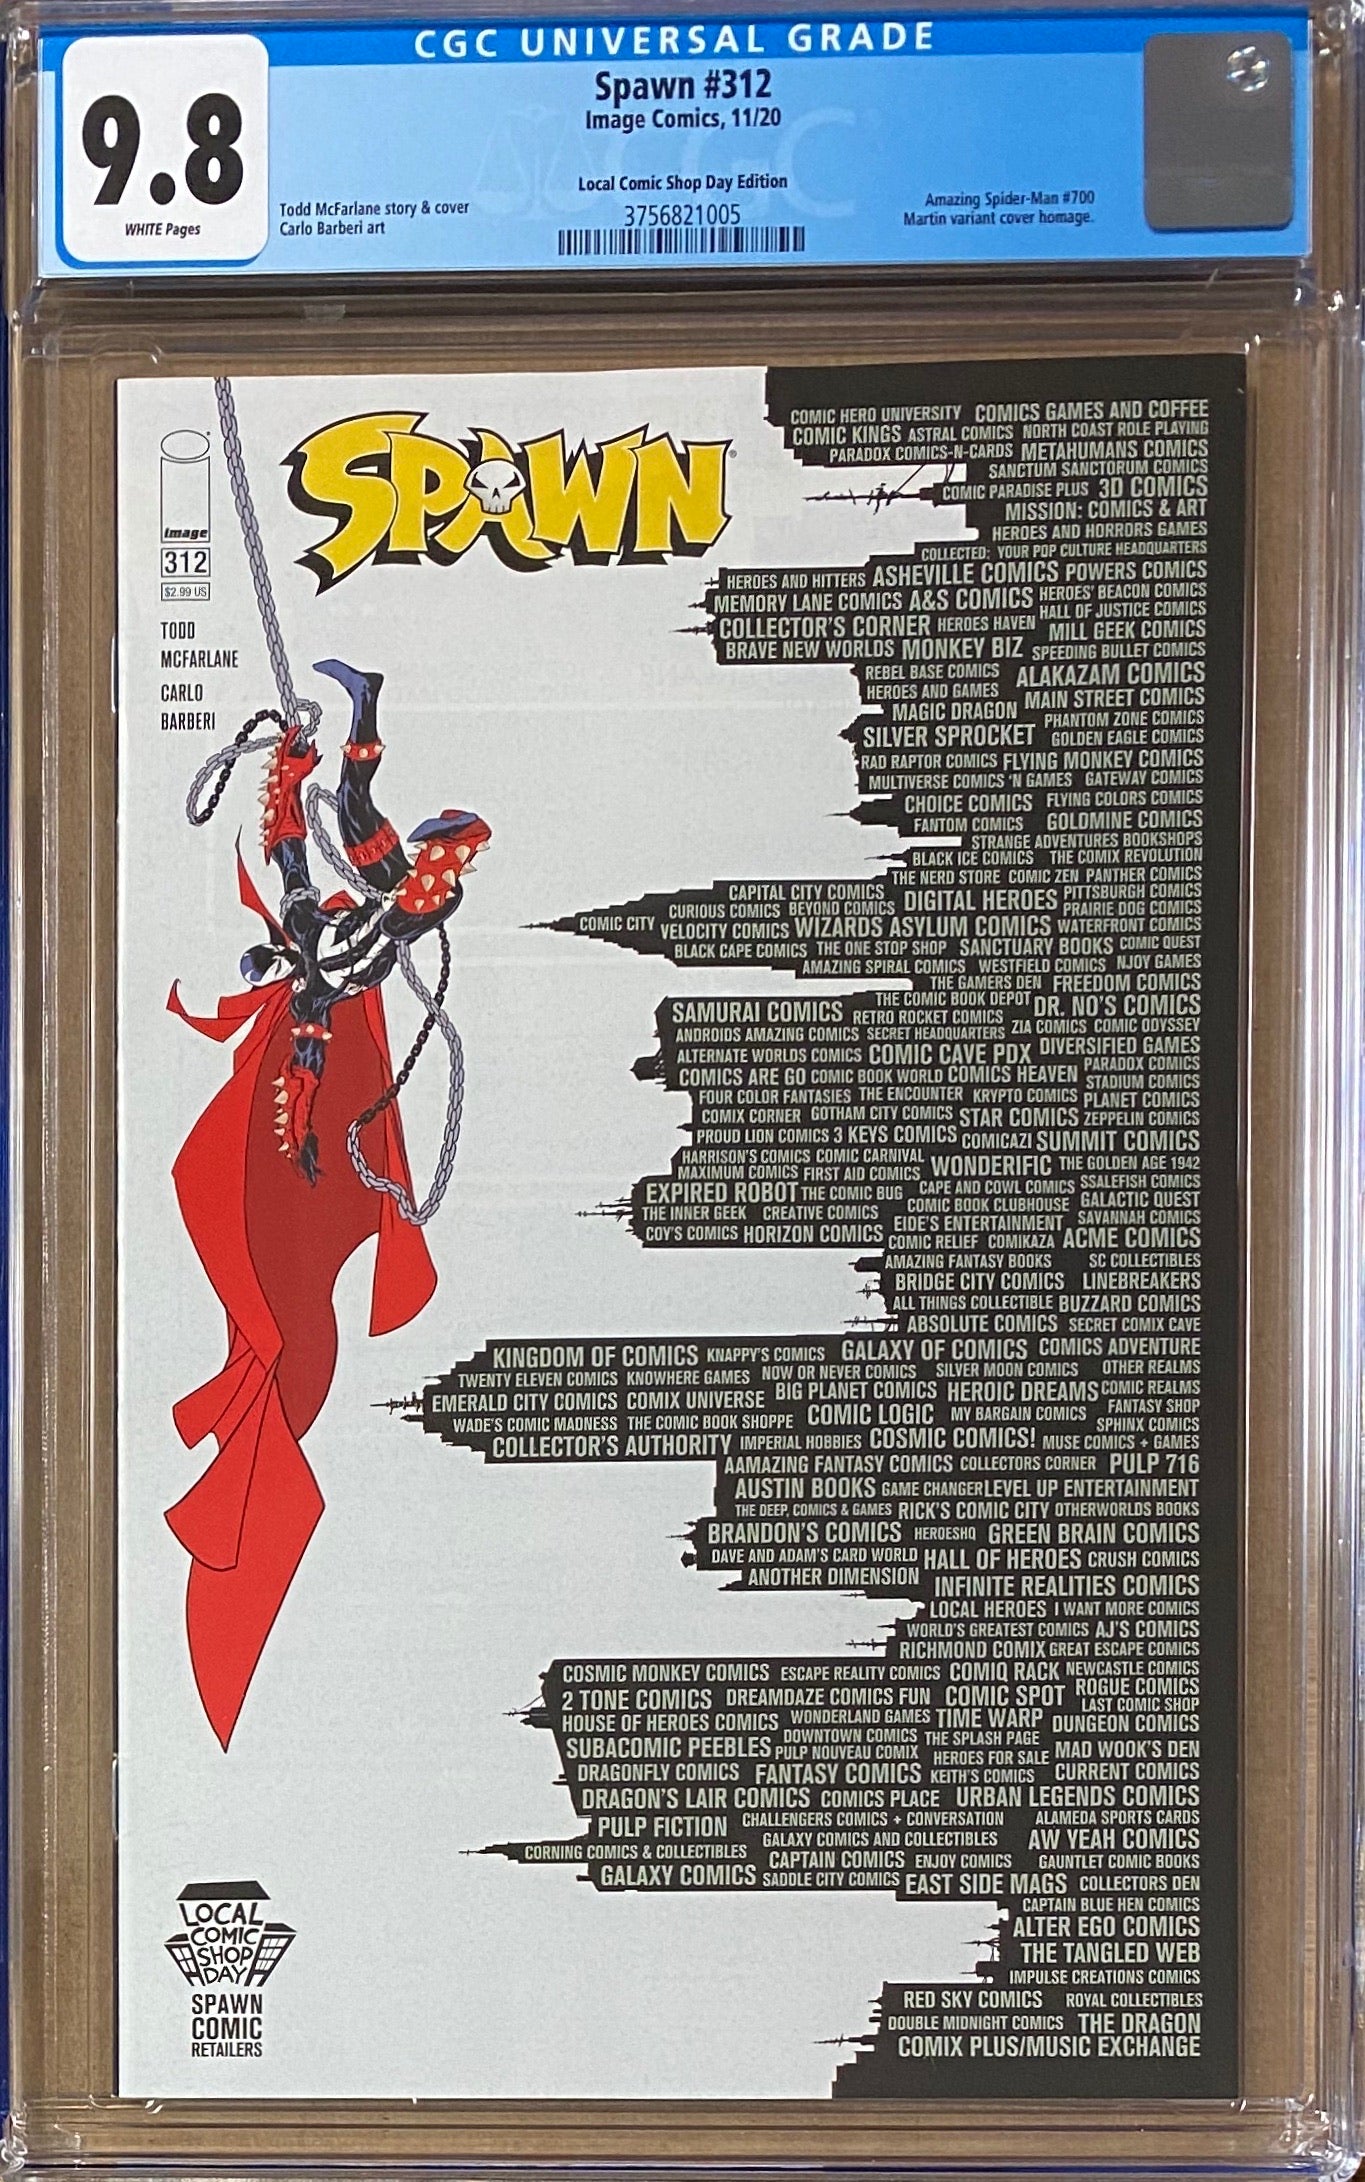 Spawn #312 CGC 9.8  Local Comic Book Day "Amazing Spider-Man #300" Homage Variant